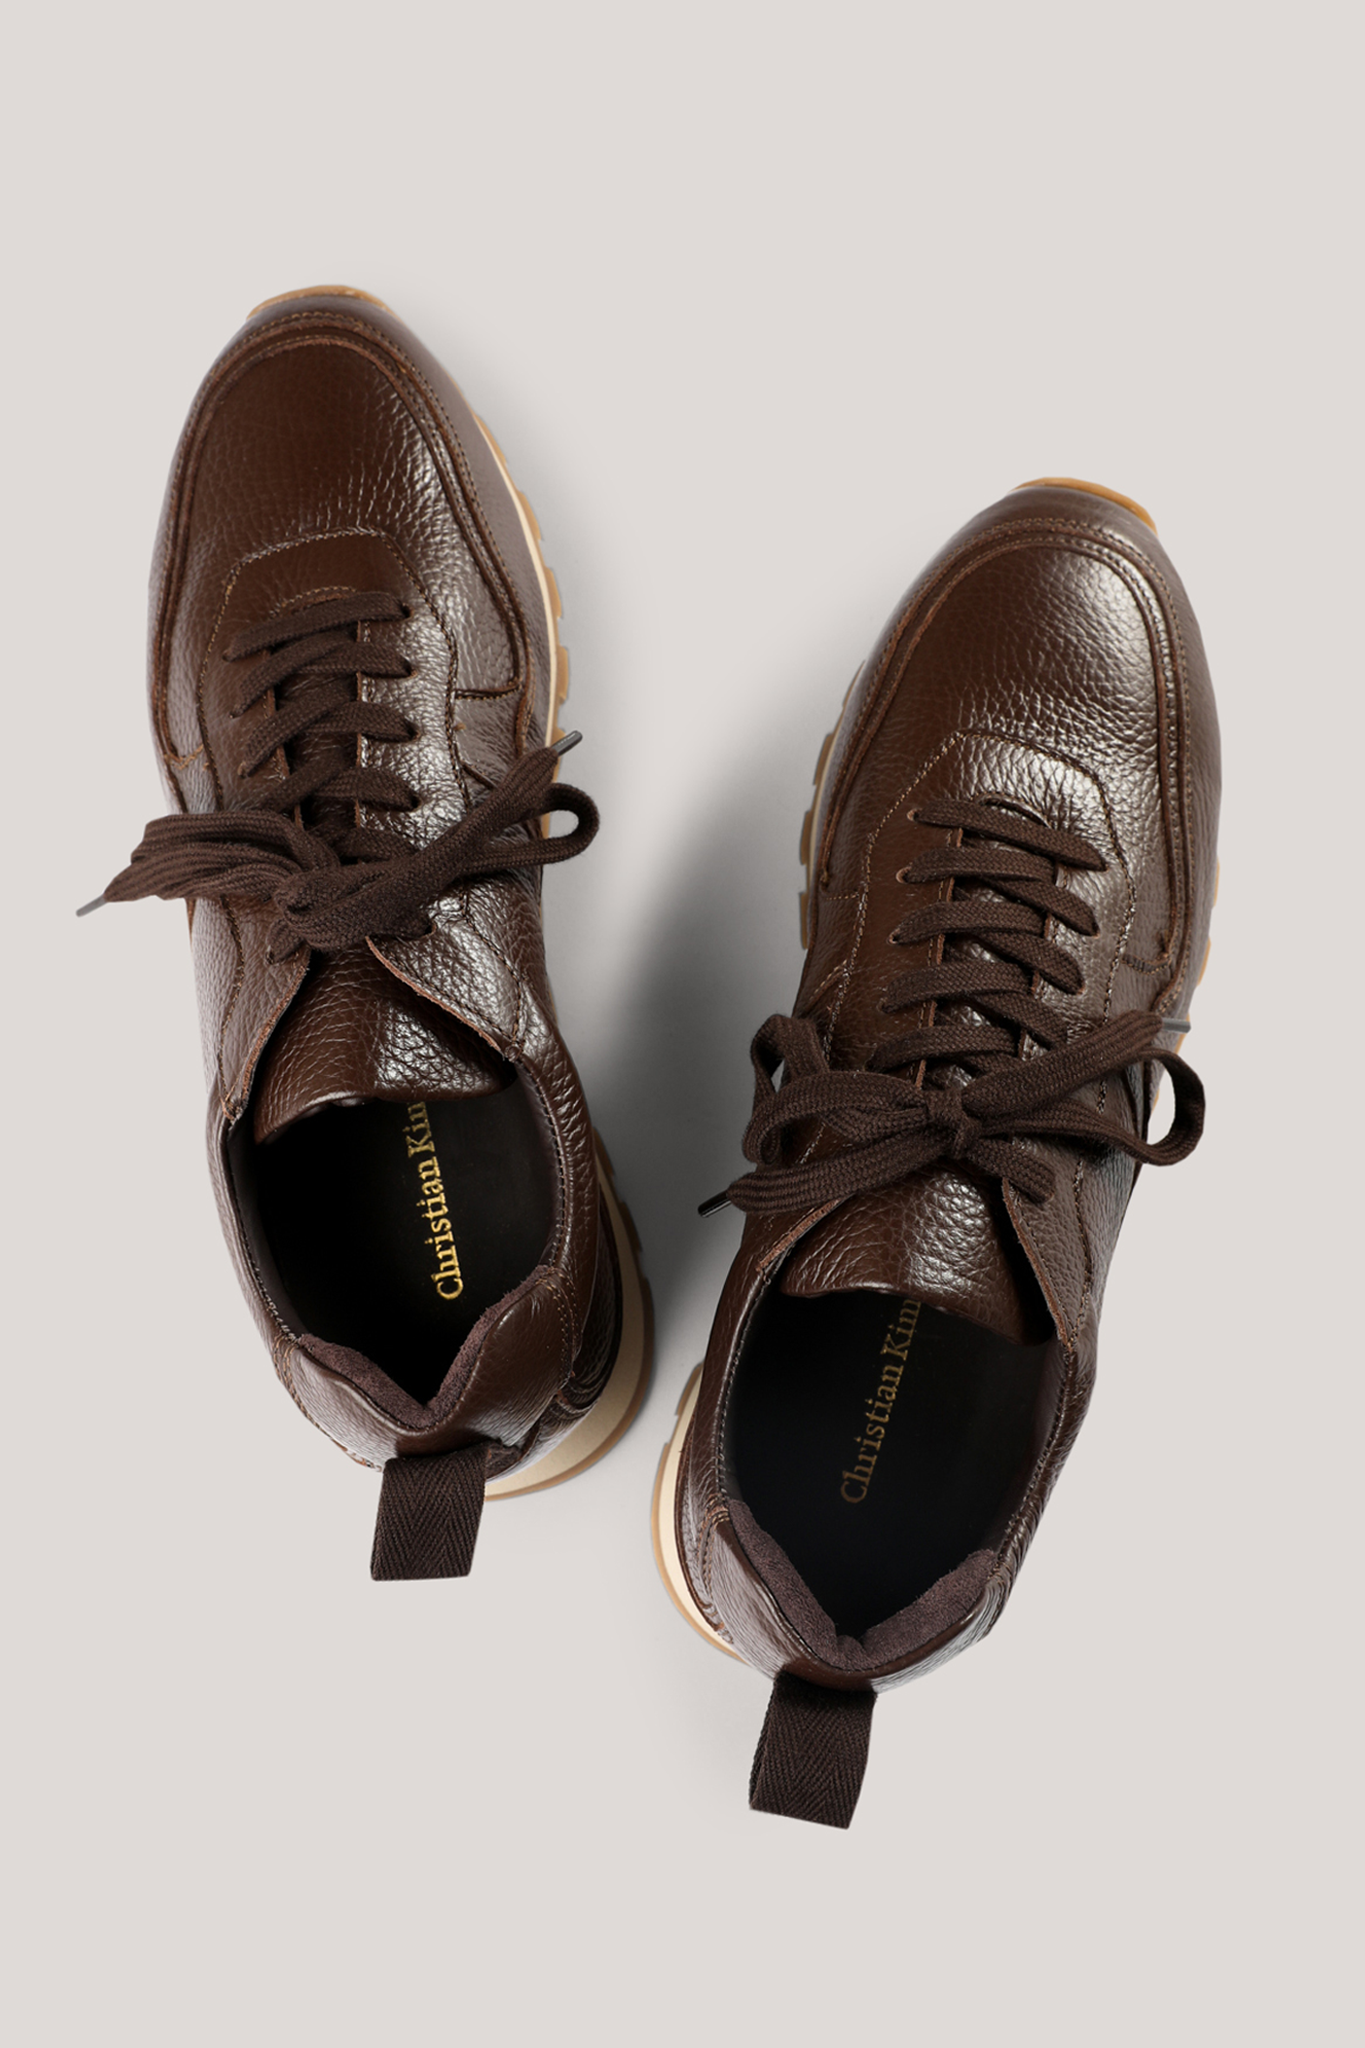 Byron Sneaker - Chocolate leather -  Limited Drop